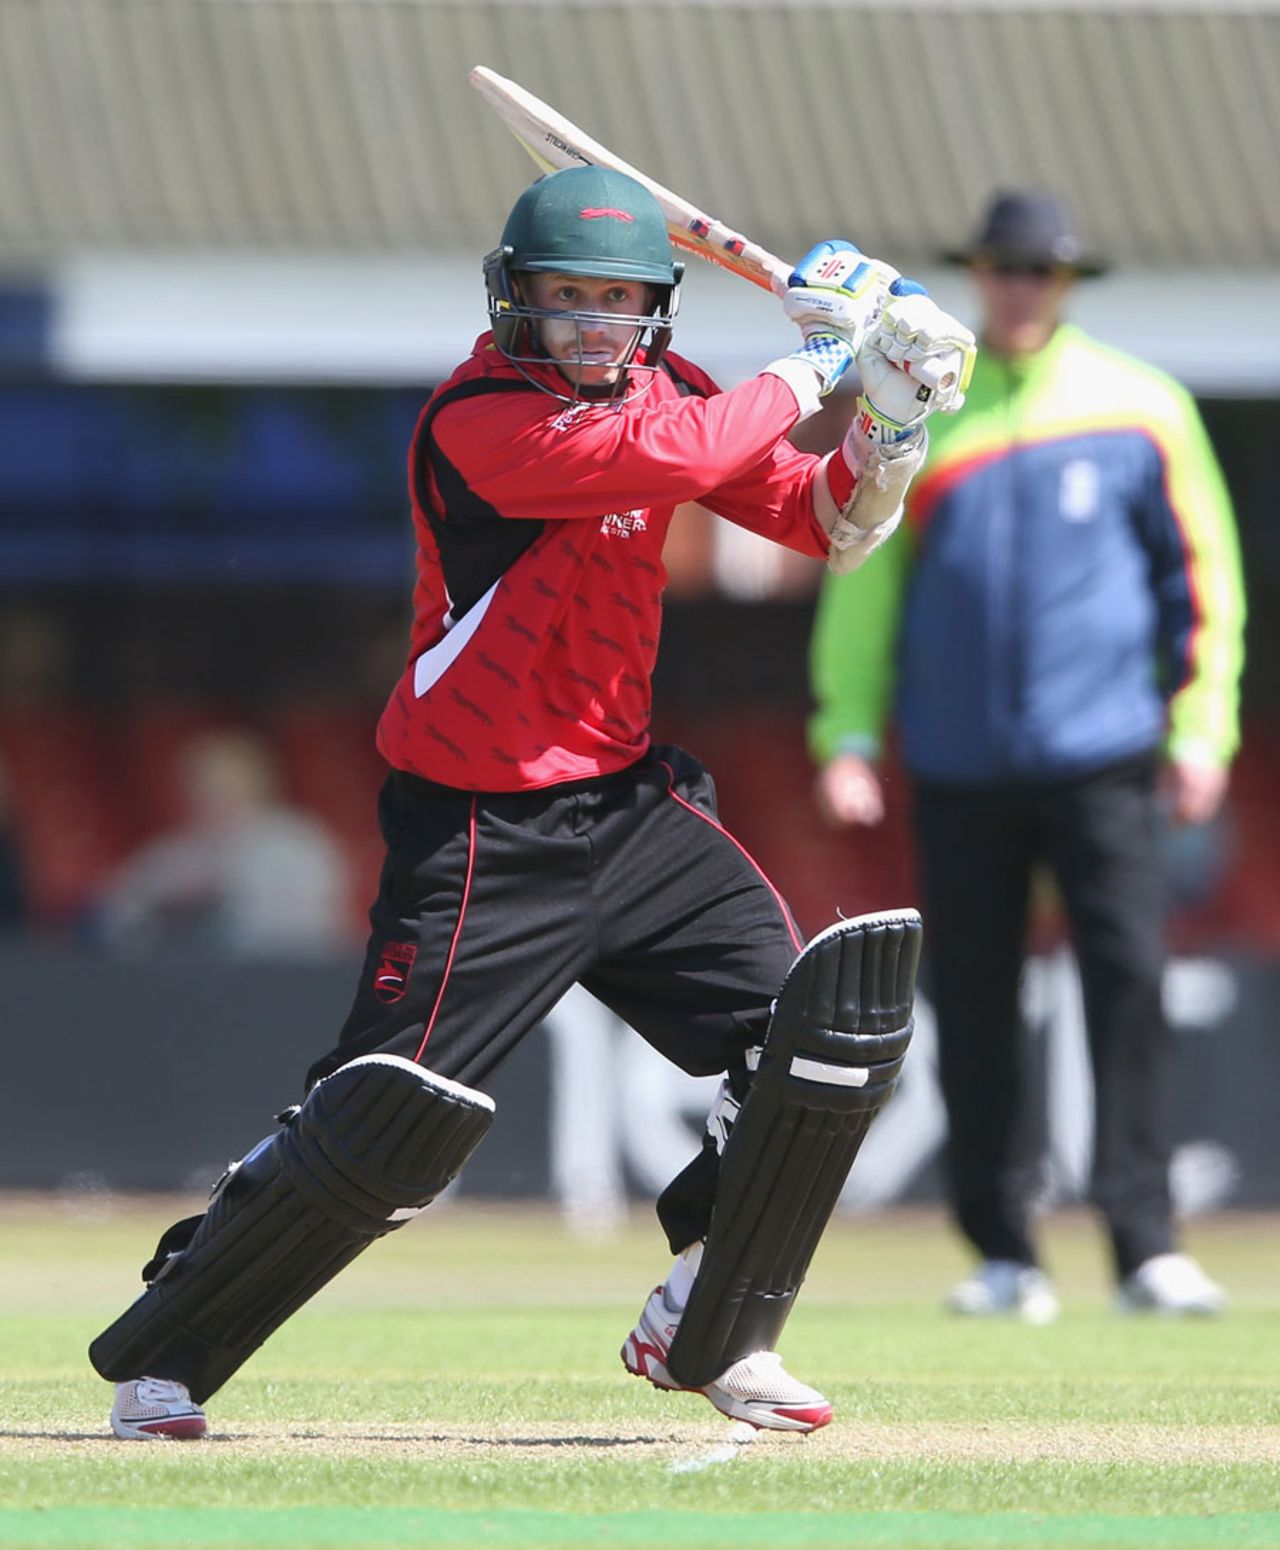 Angus Robson scored his maiden List A half-century, Leicestershire v New Zealanders, Tour match, Grace Road, June 6, 2015